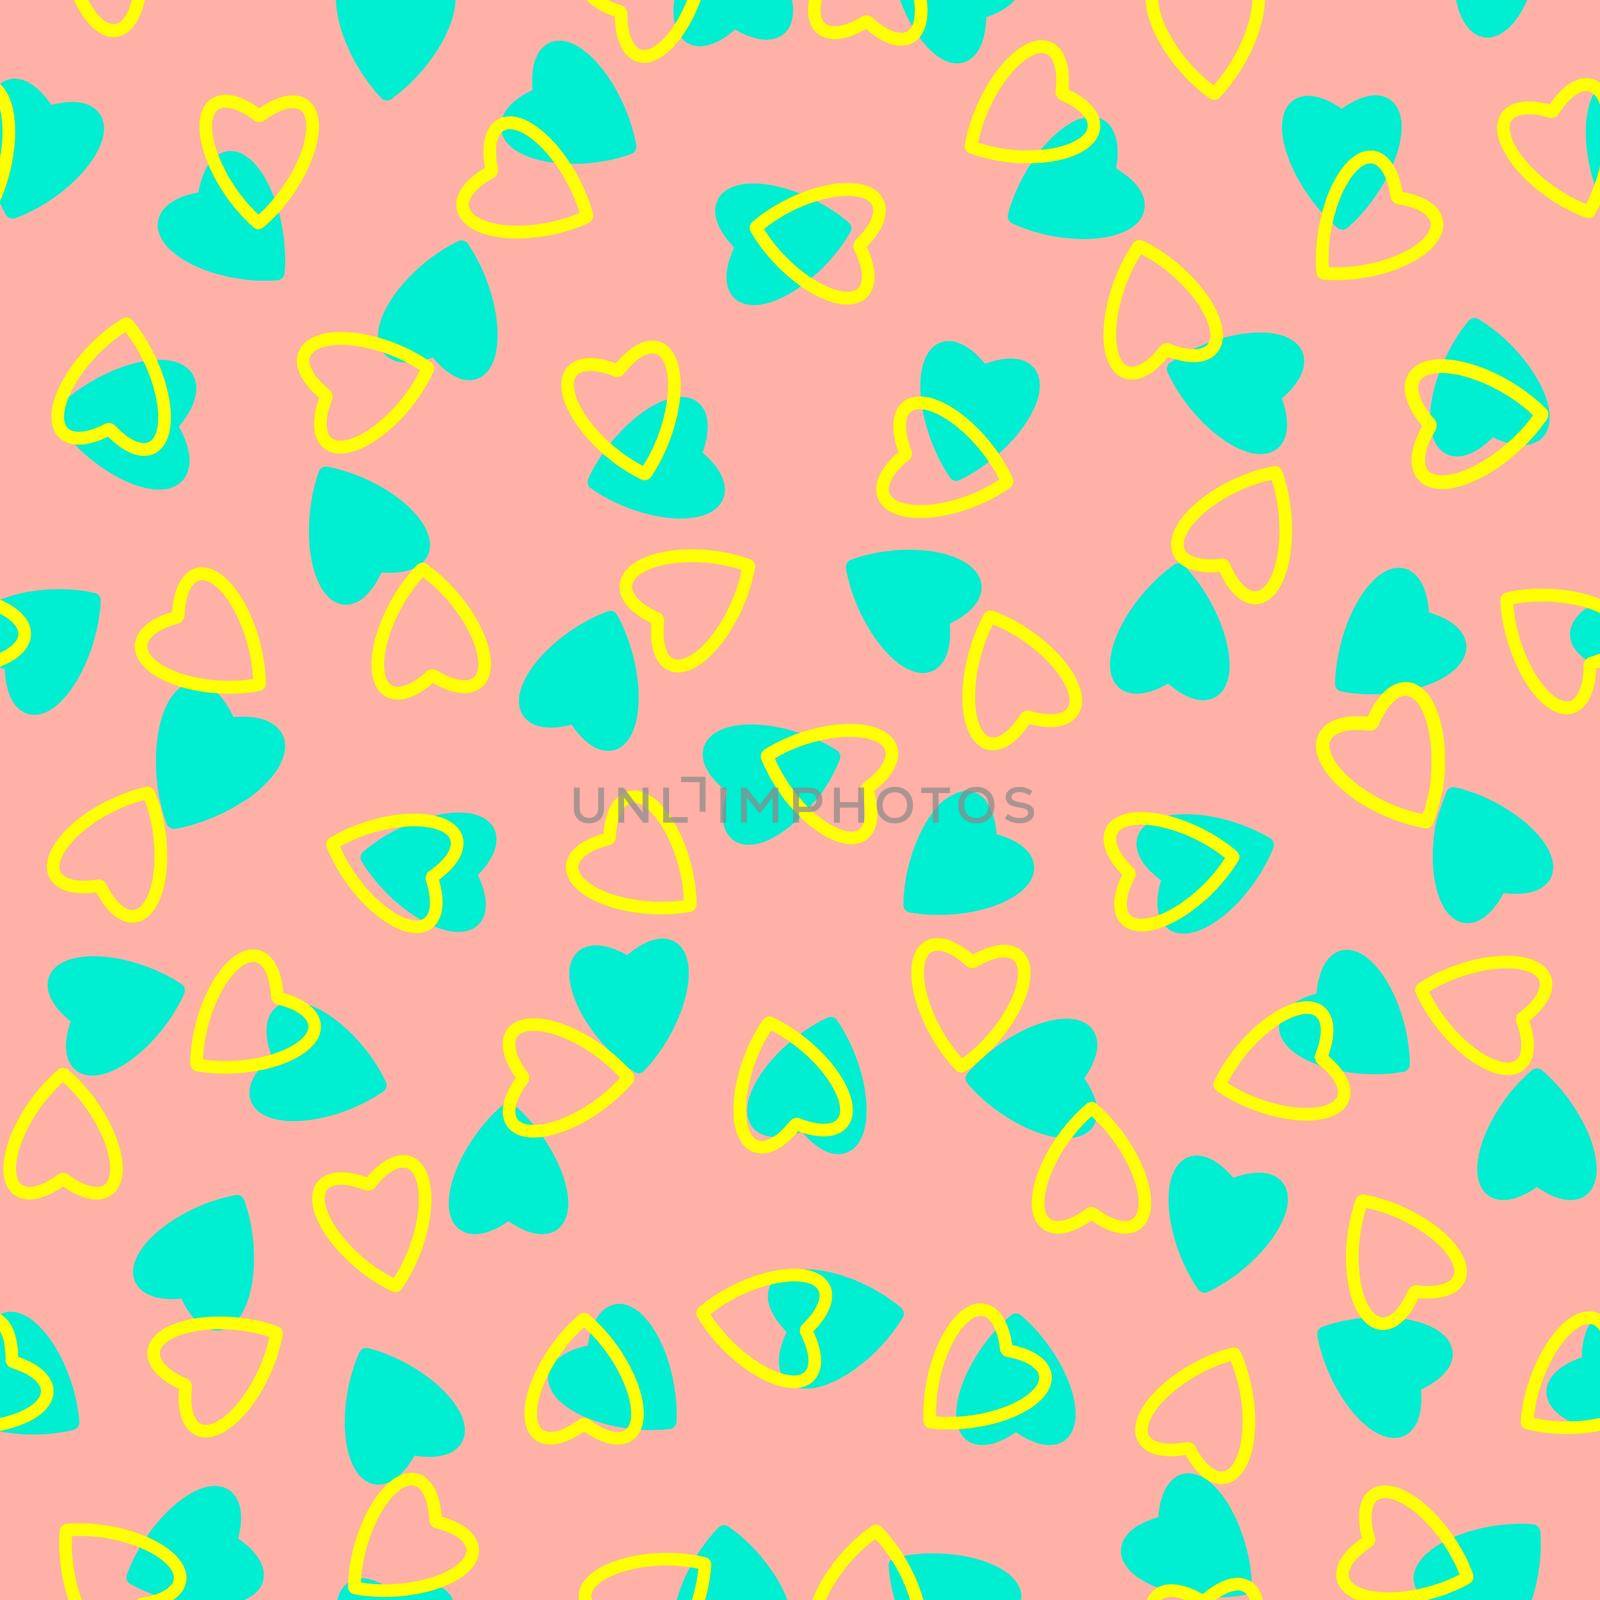 Simple hearts seamless pattern,endless chaotic texture made tiny heart silhouettes.Valentines,mothers day background.Great for Easter,wedding,scrapbook,gift wrapping paper,textiles.Azure,yellow,peach by Angelsmoon